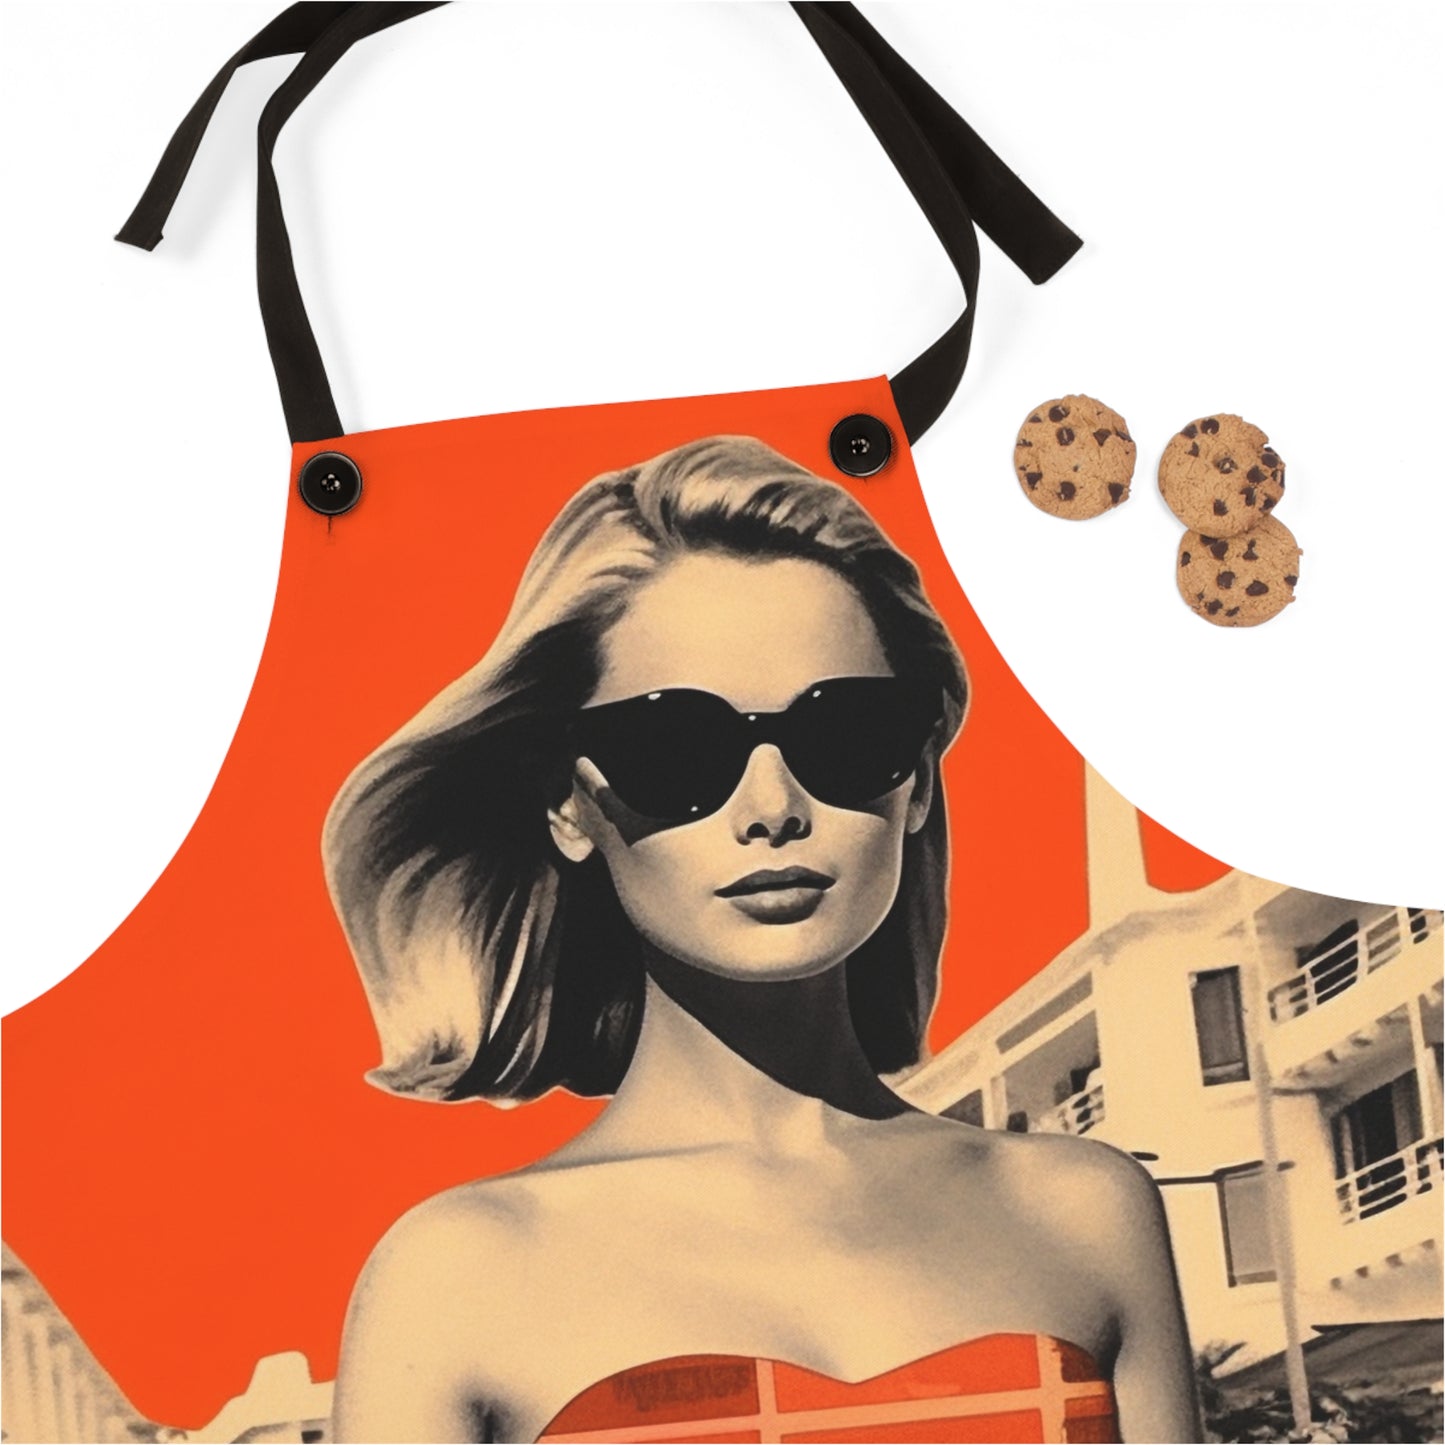 JENNY Chef APRON, French Couture, Pop Art, Travel, Fashion, Gourmet, Cuisine, Cook, France, must have gift item